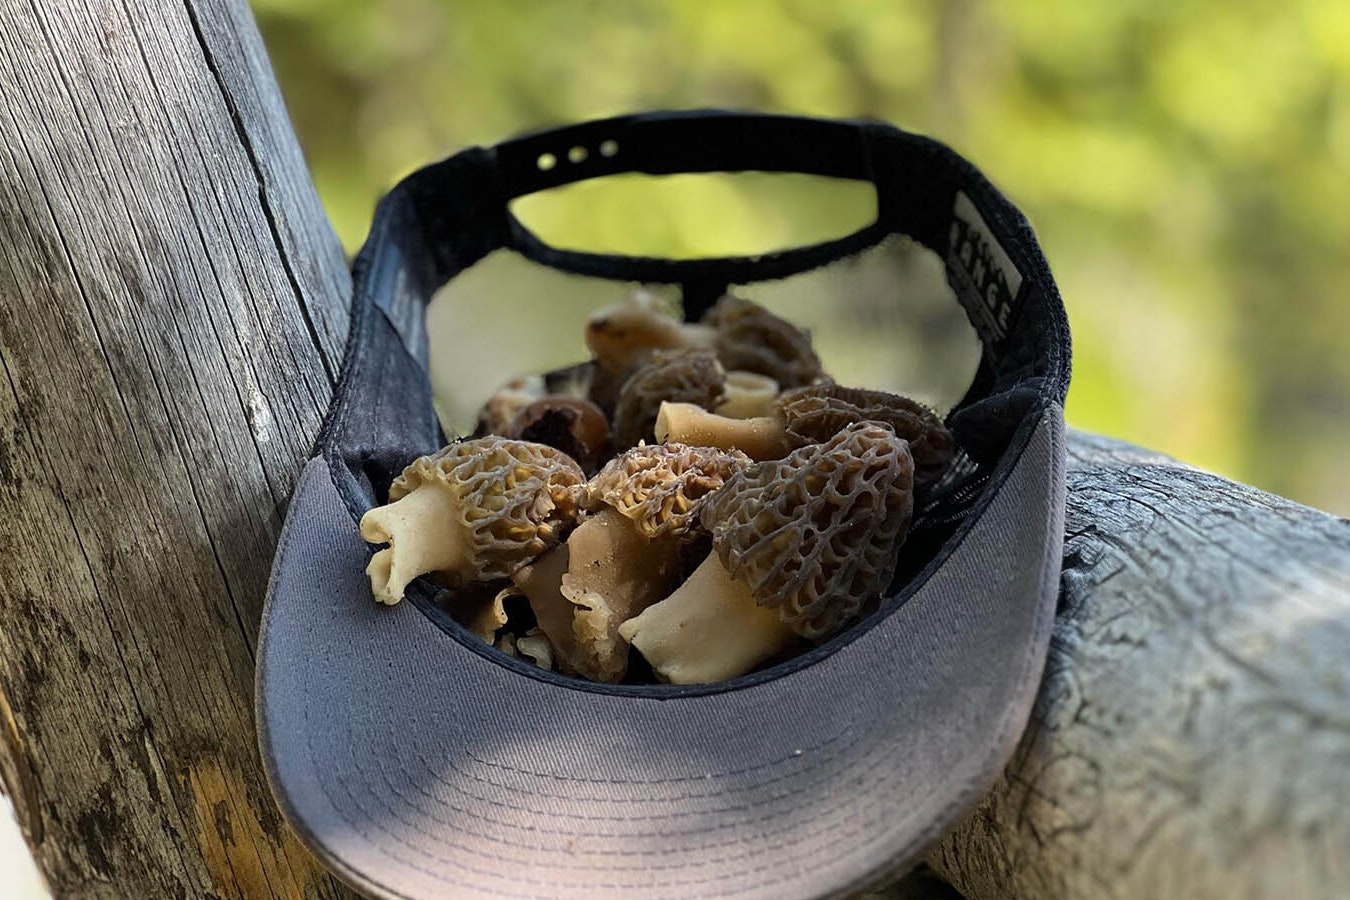 Morels in a baseball up in the Wyoming mountains.